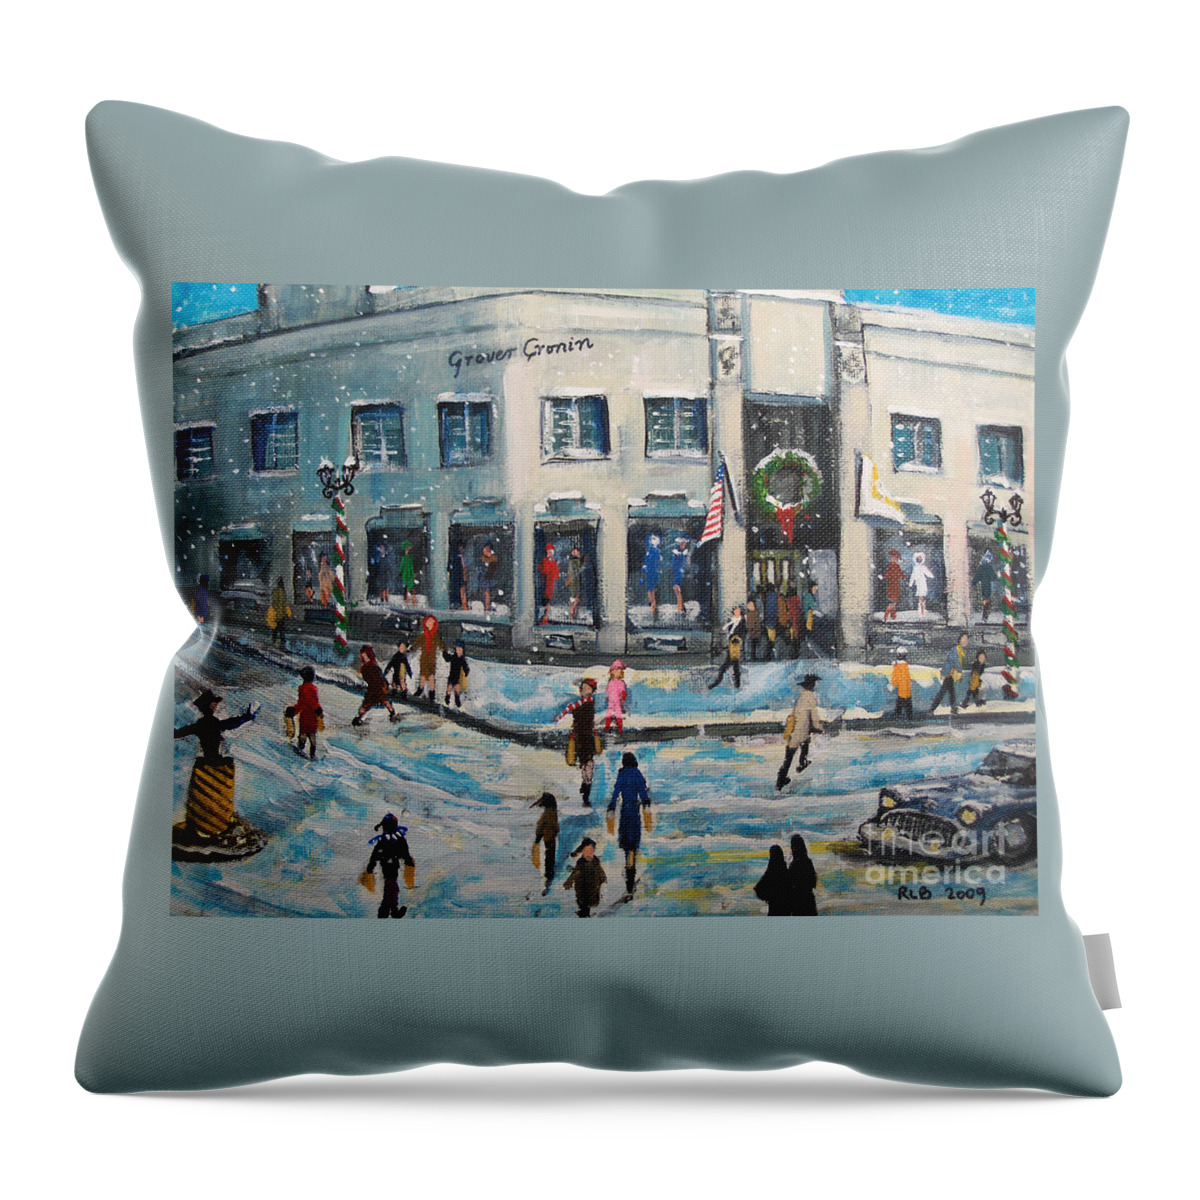 Grover Cronin Throw Pillow featuring the painting Shopping at Grover Cronin by Rita Brown